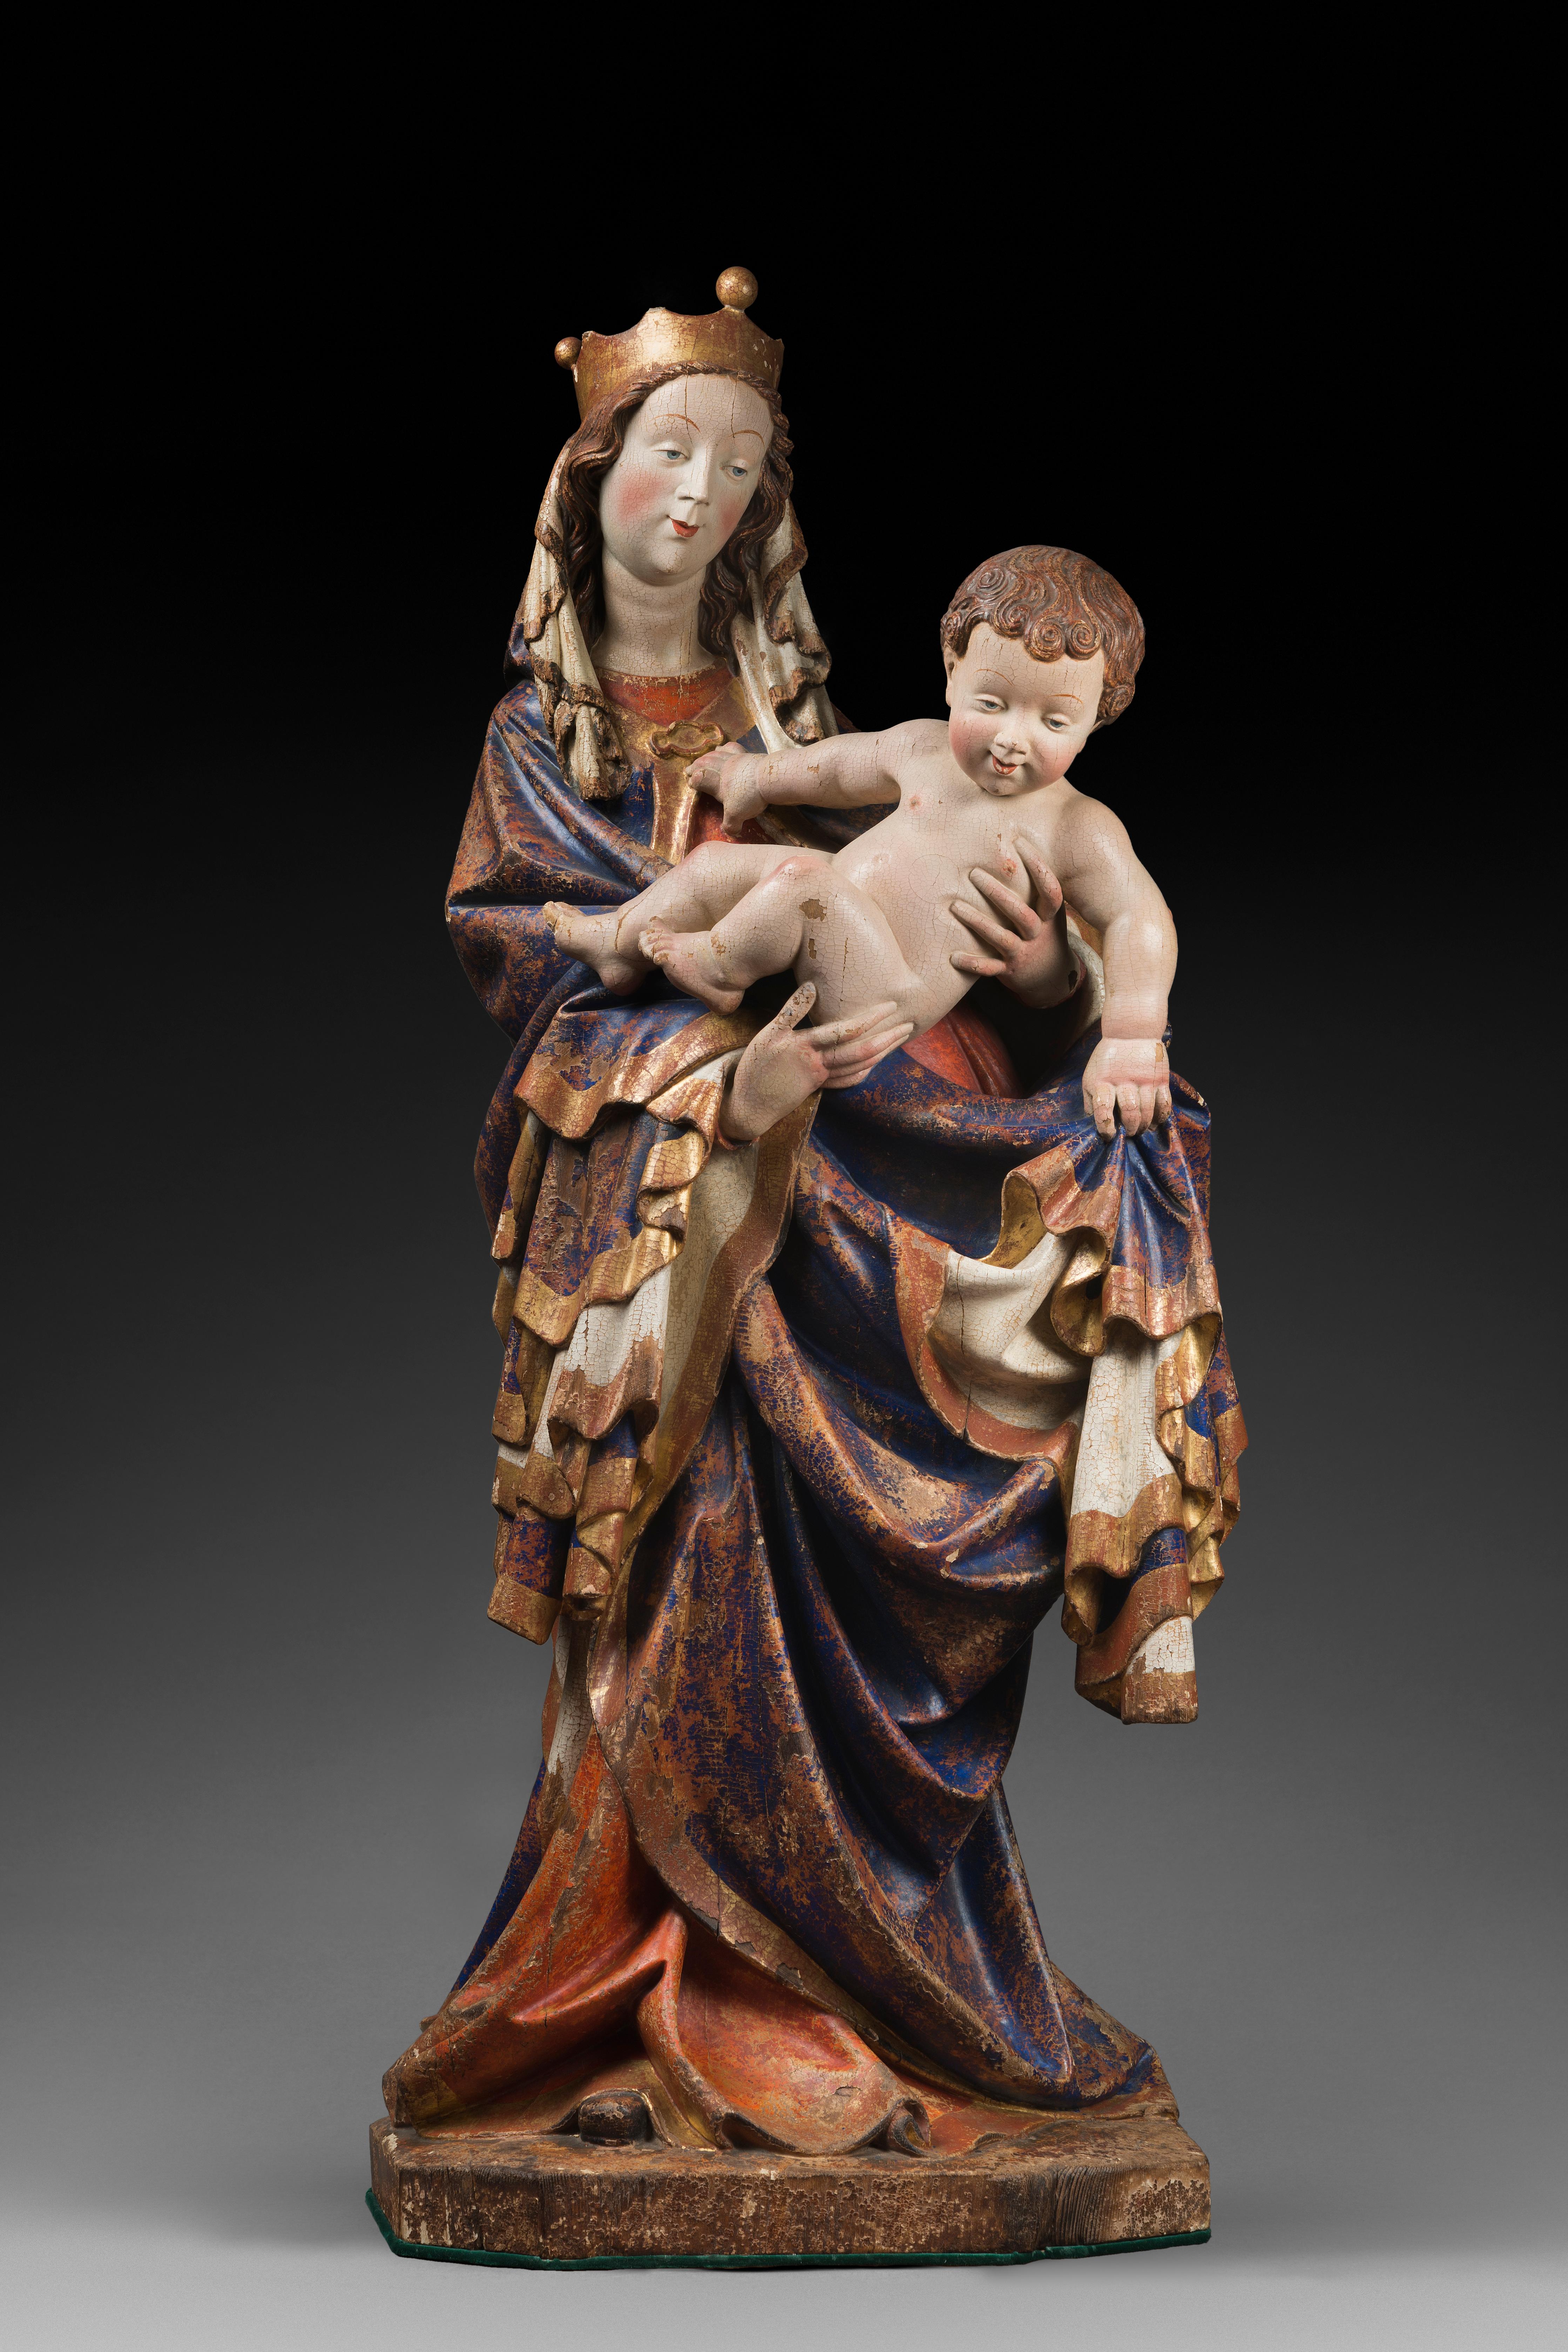 Exceptionnal polychrome wood virgin with child in the style of Salzburg’s Madonnas

Origin : Central Europe
Era : 19th century

Measures: height : 123 cm
Width : 50 cm
Depth : 35 cm

Good condition
Polychrome wood


This Virgin and